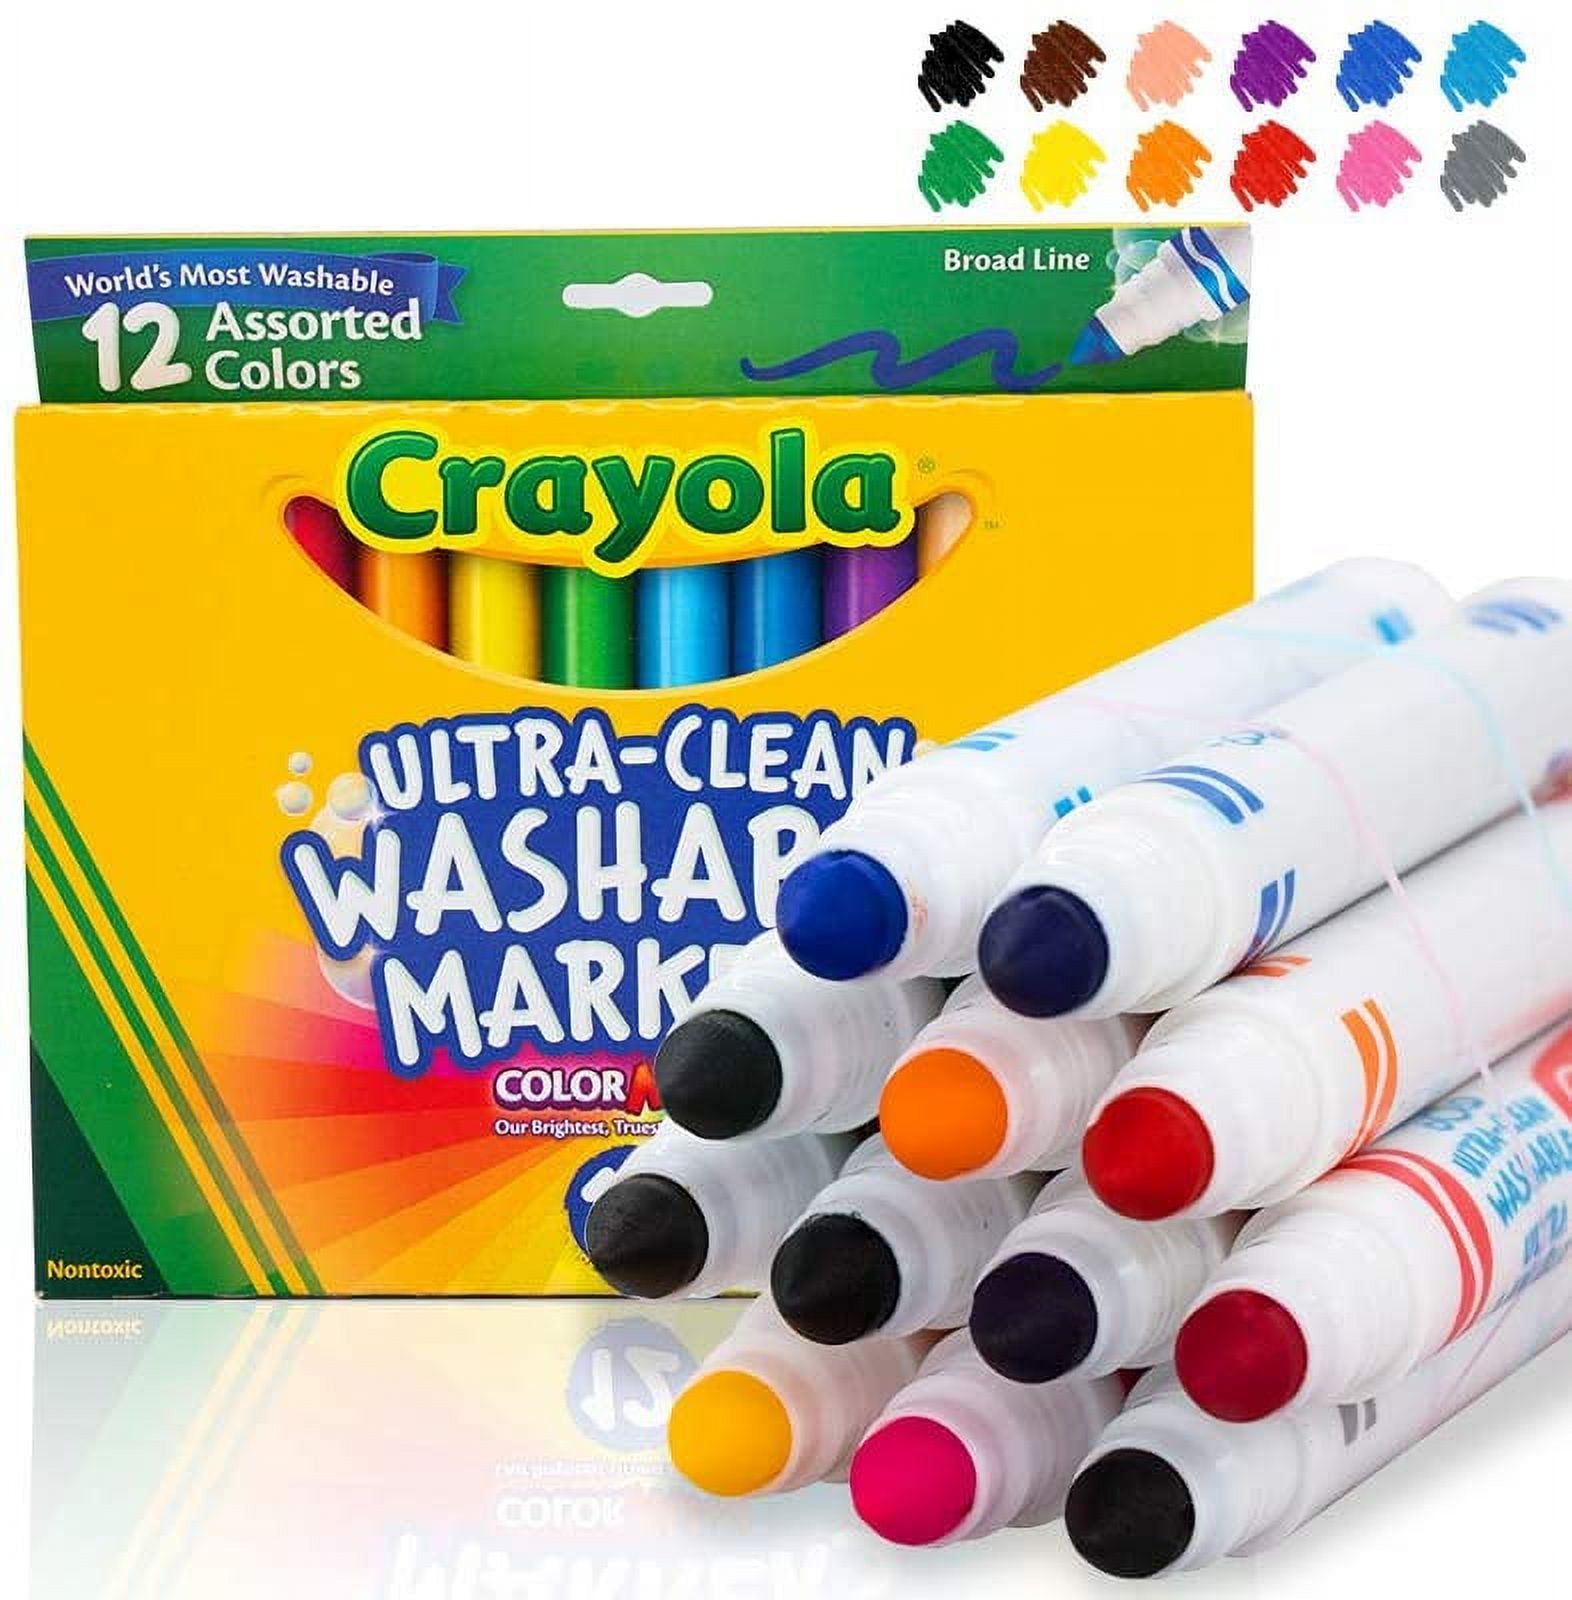 Crayola Kid's Markers Broad Line Assorted Colors 12/Box (58-7712) 509012 